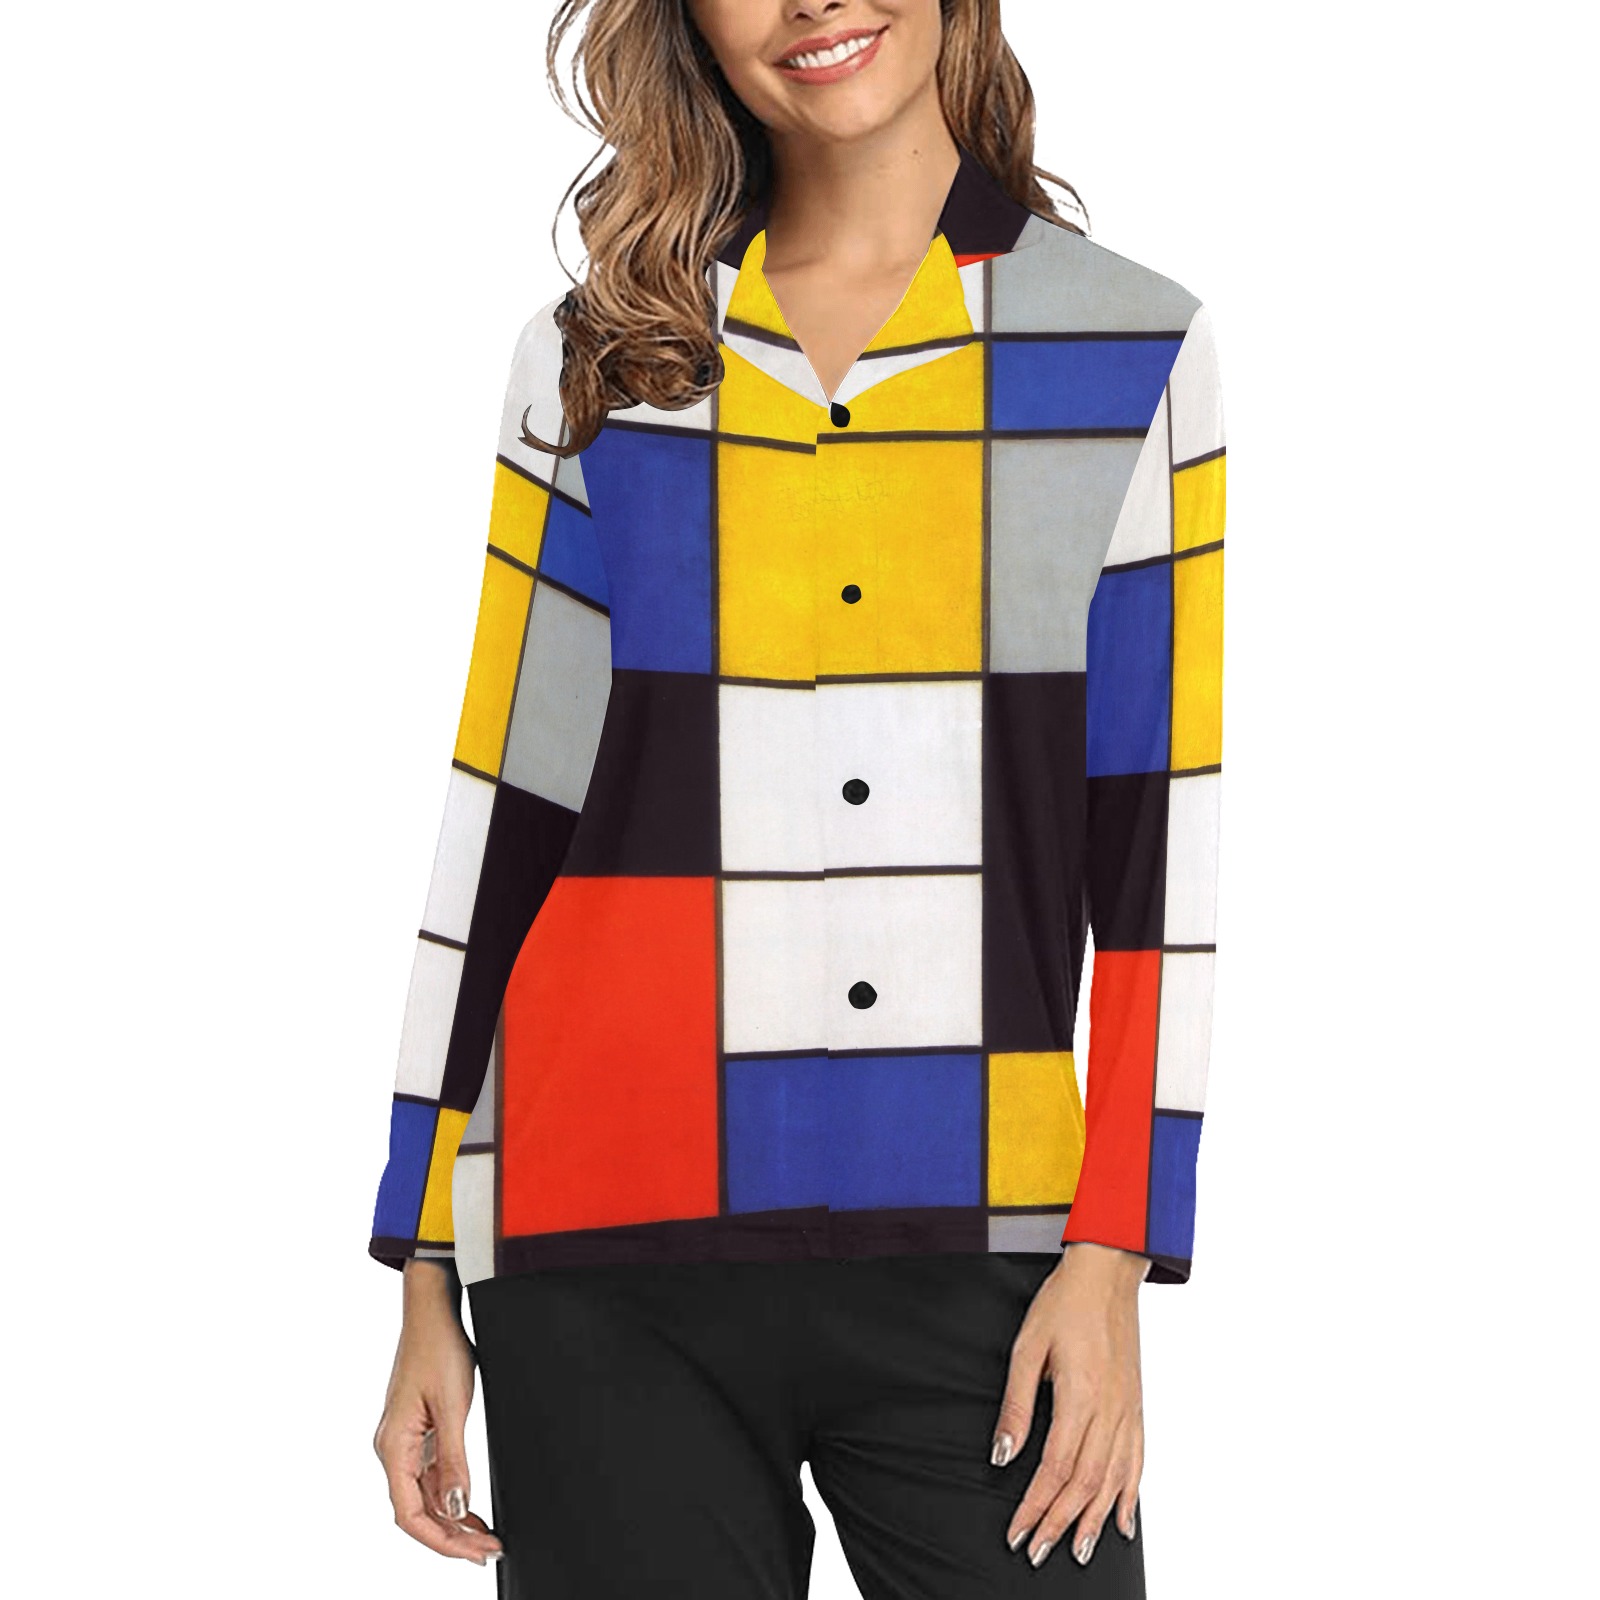 Composition A by Piet Mondrian Women's Long Sleeve Pajama Shirt